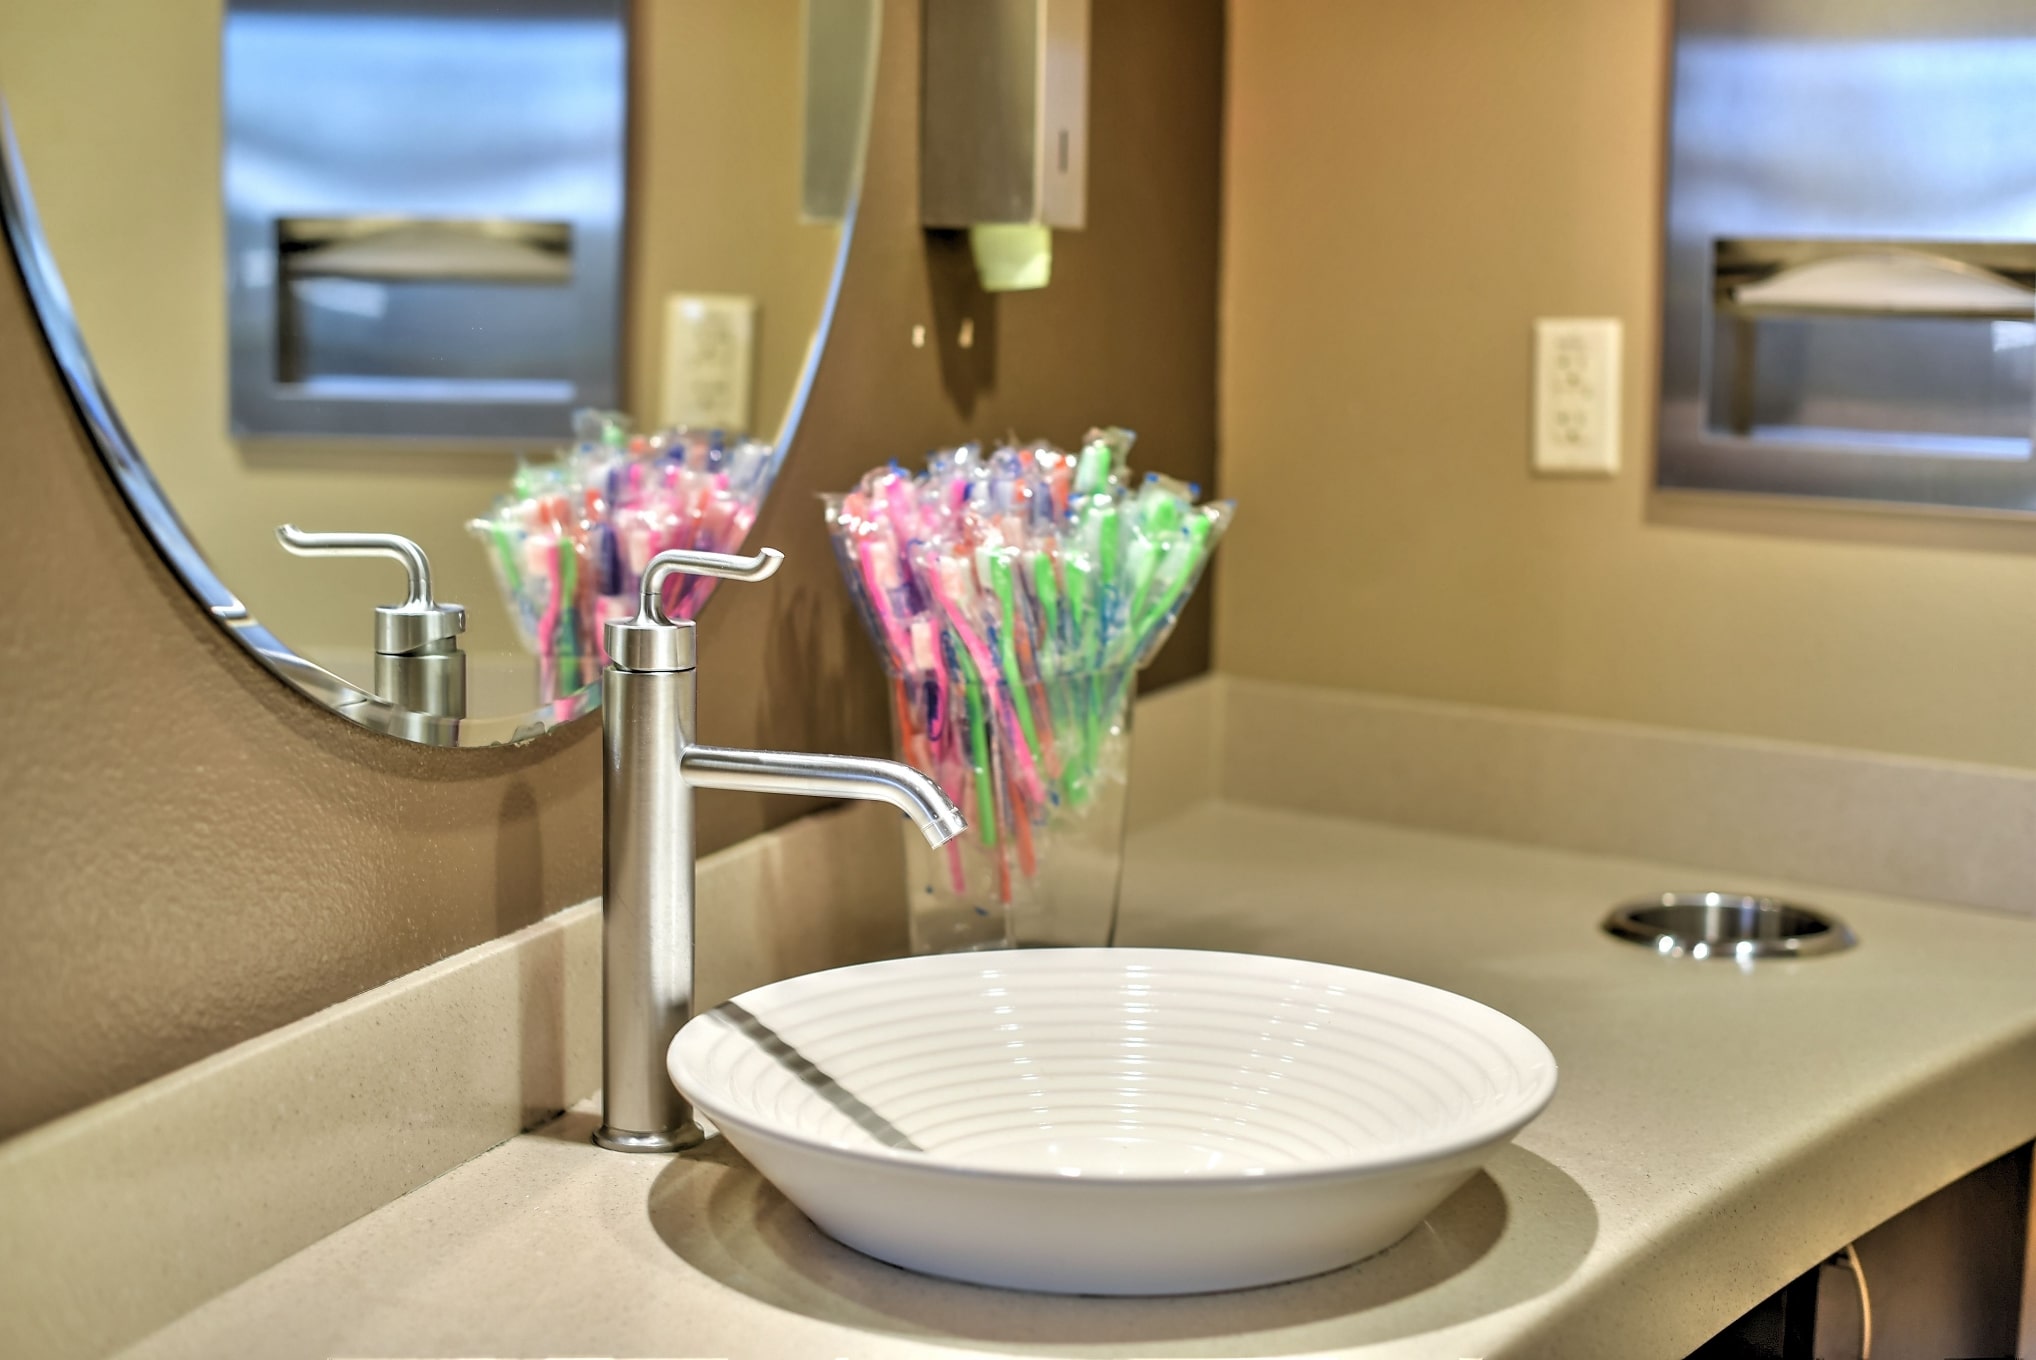 tooth brushing sink for orthodontic treatment